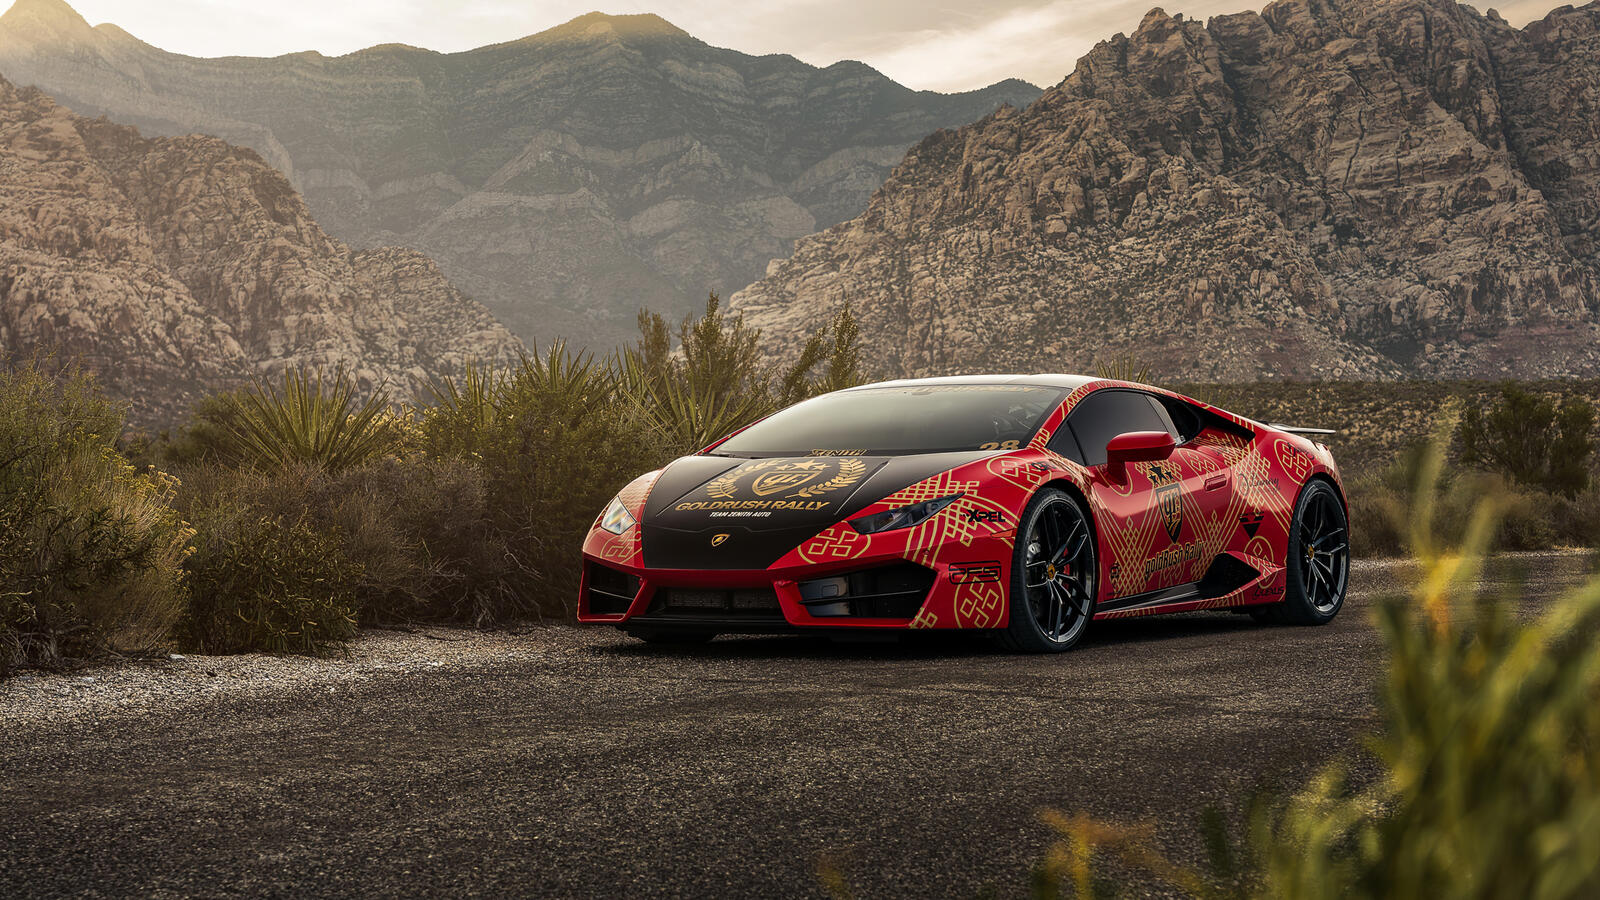 Wallpapers Lamborghini Huracan red front of on the desktop